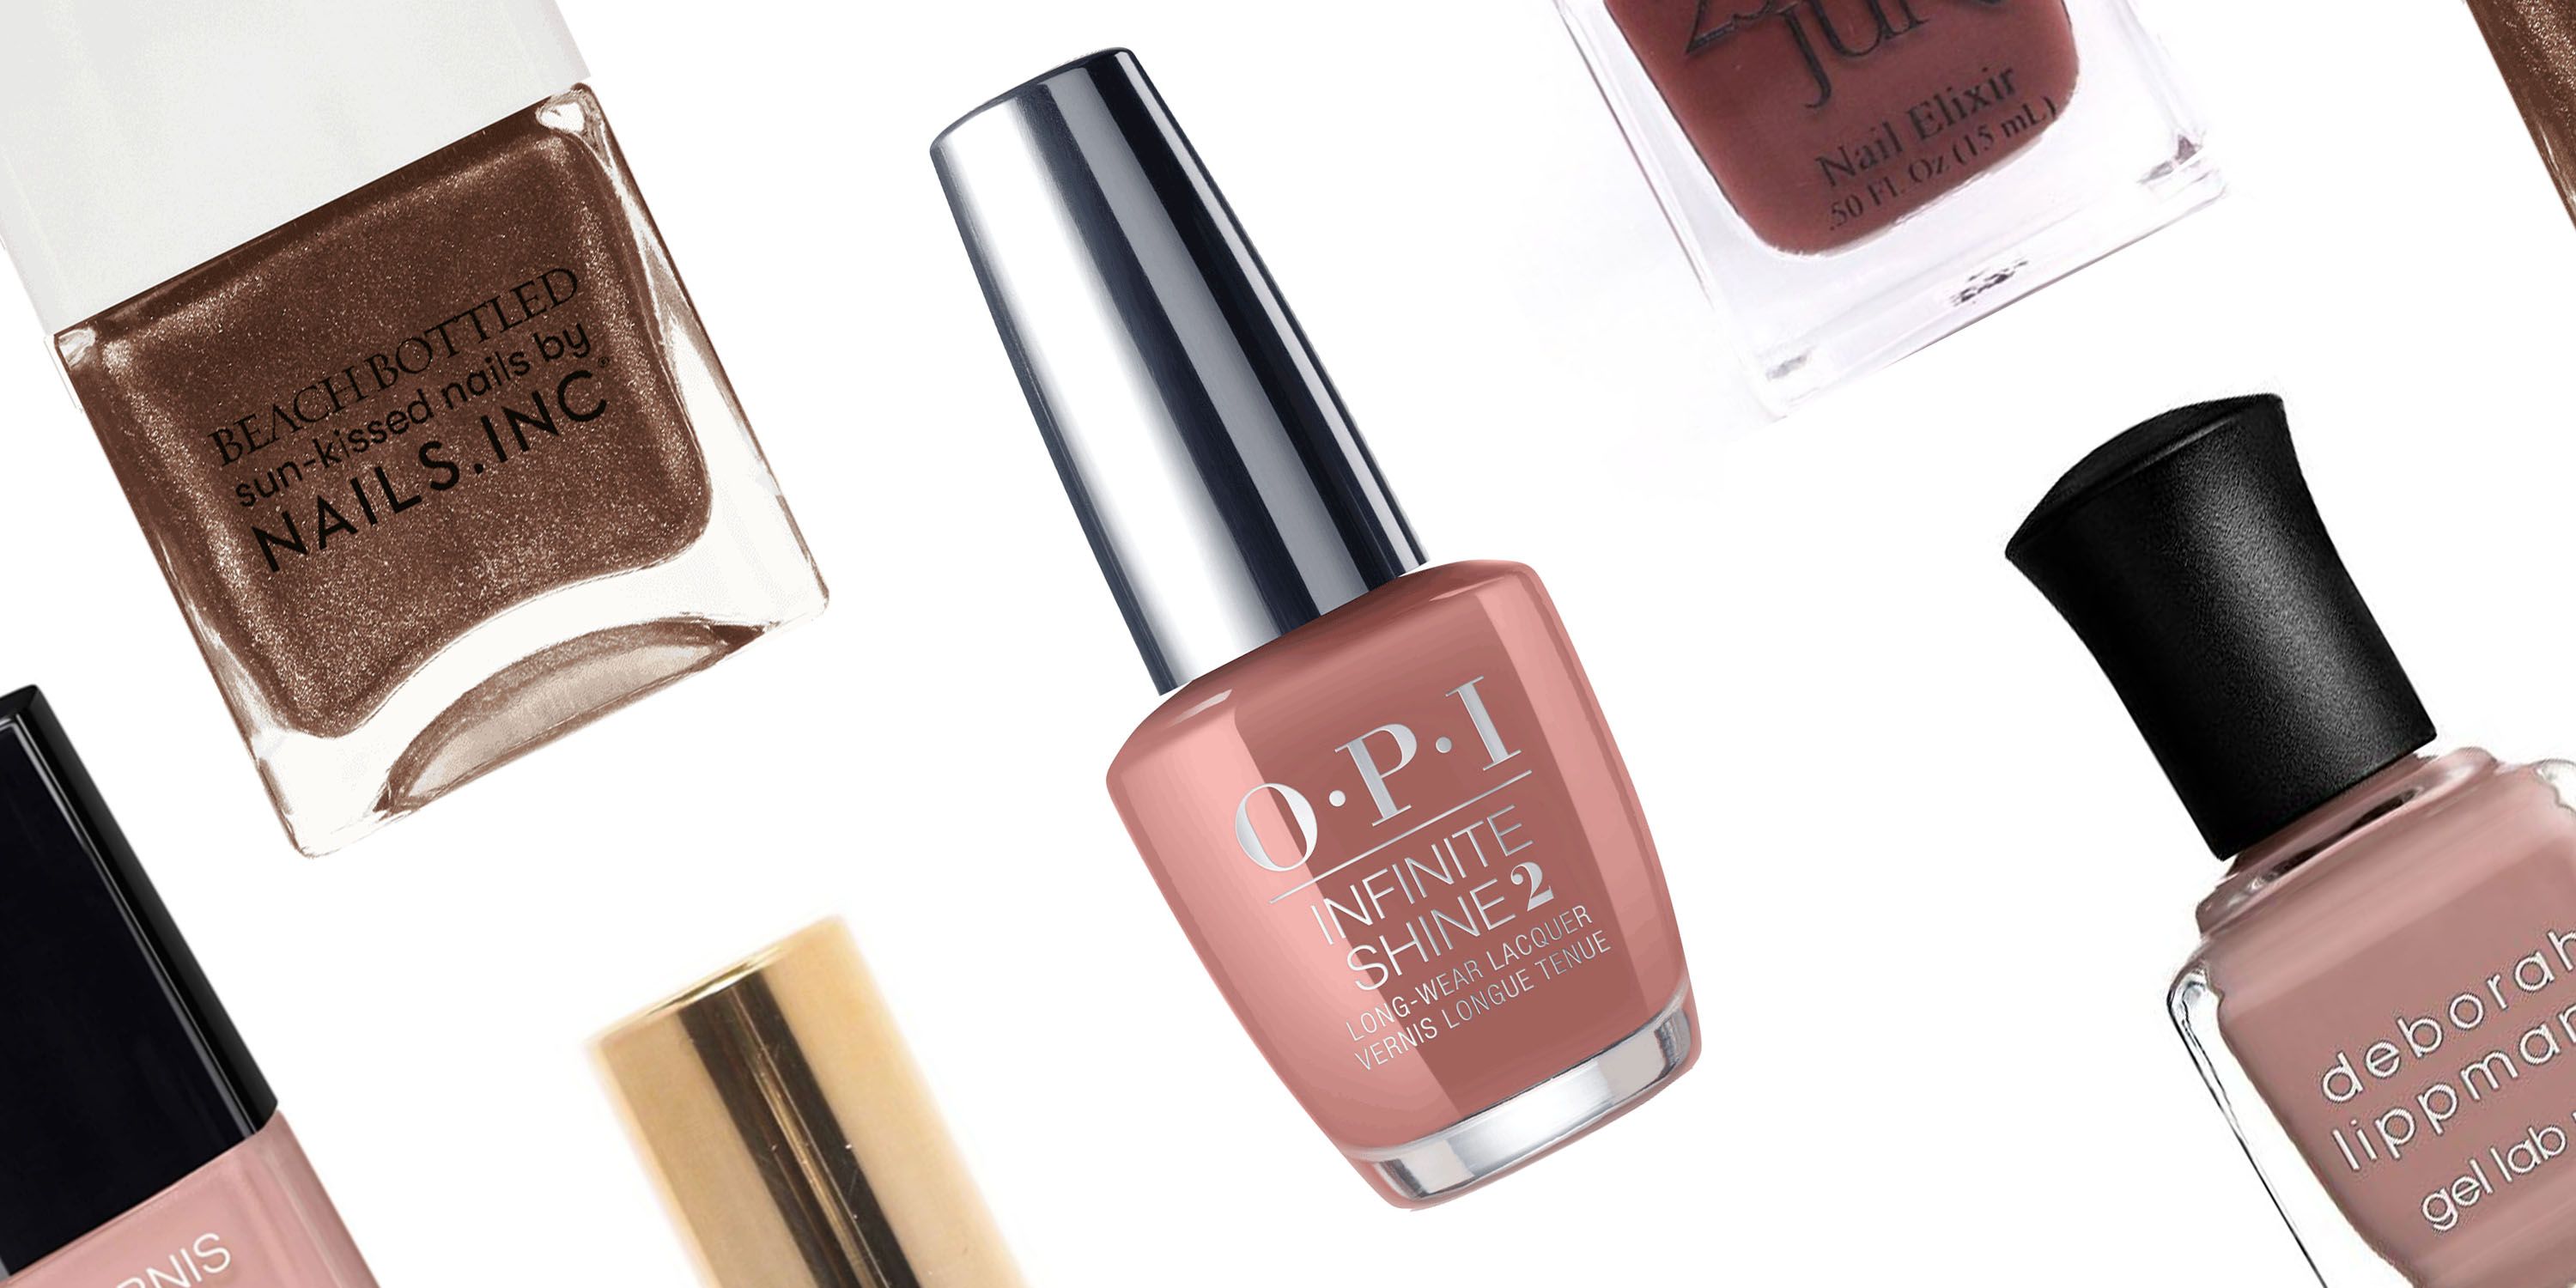 3. "The Perfect Nail Polish Color Combos for Your Skin Tone" - wide 8